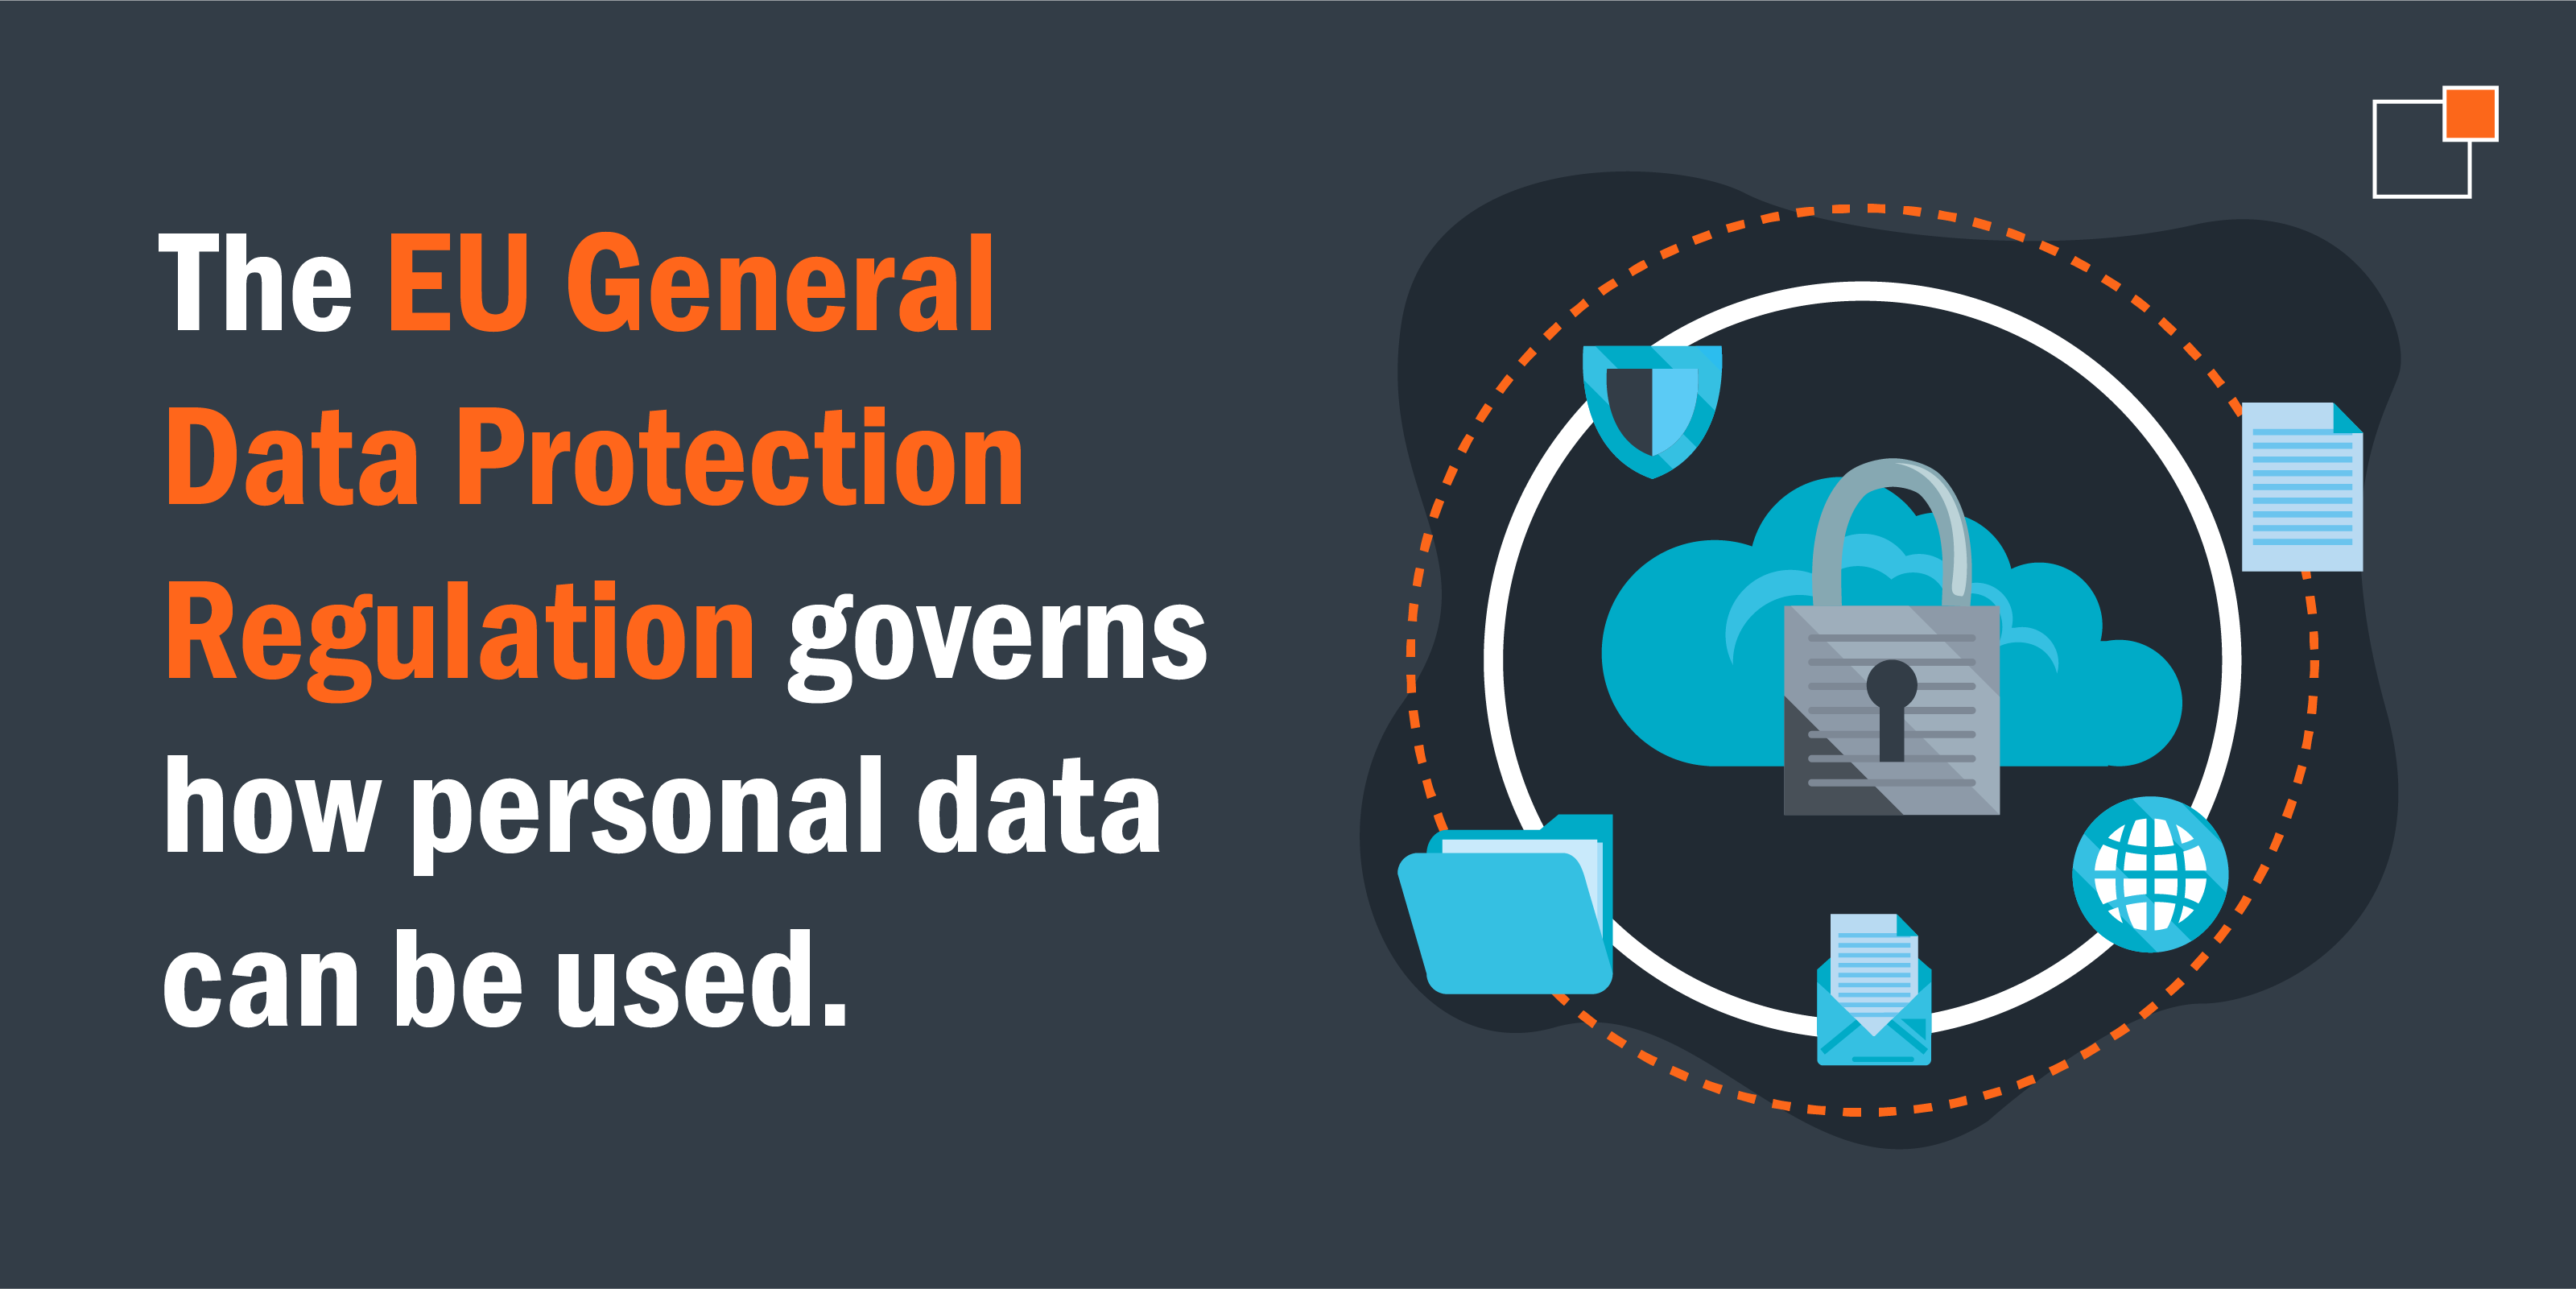 The EU General Data Protection Regulation governs how personal data can be used.